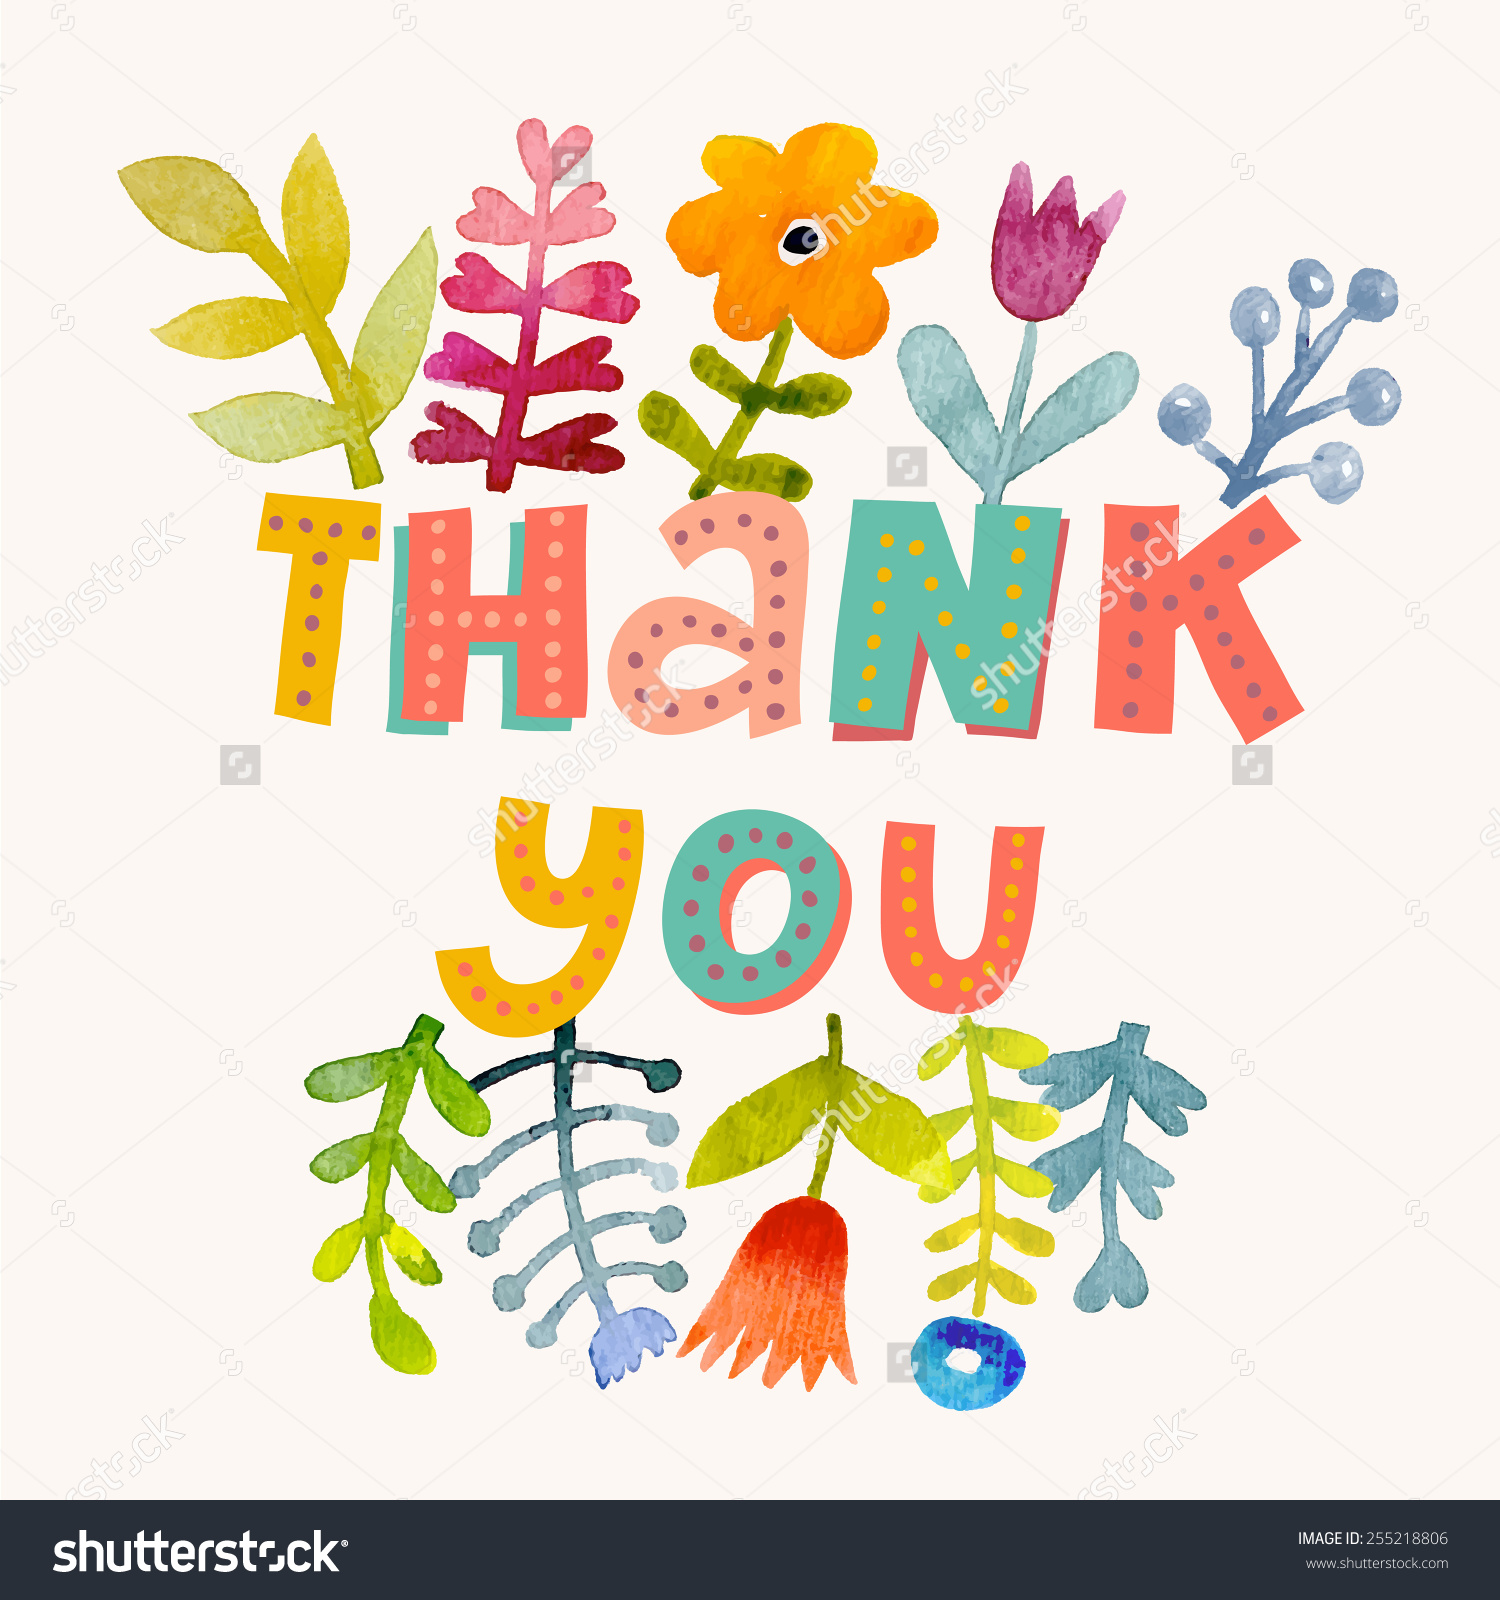 stock vector sweetly pretty thank you card in vector awesome flowers made in watercolor technique bright 255218806